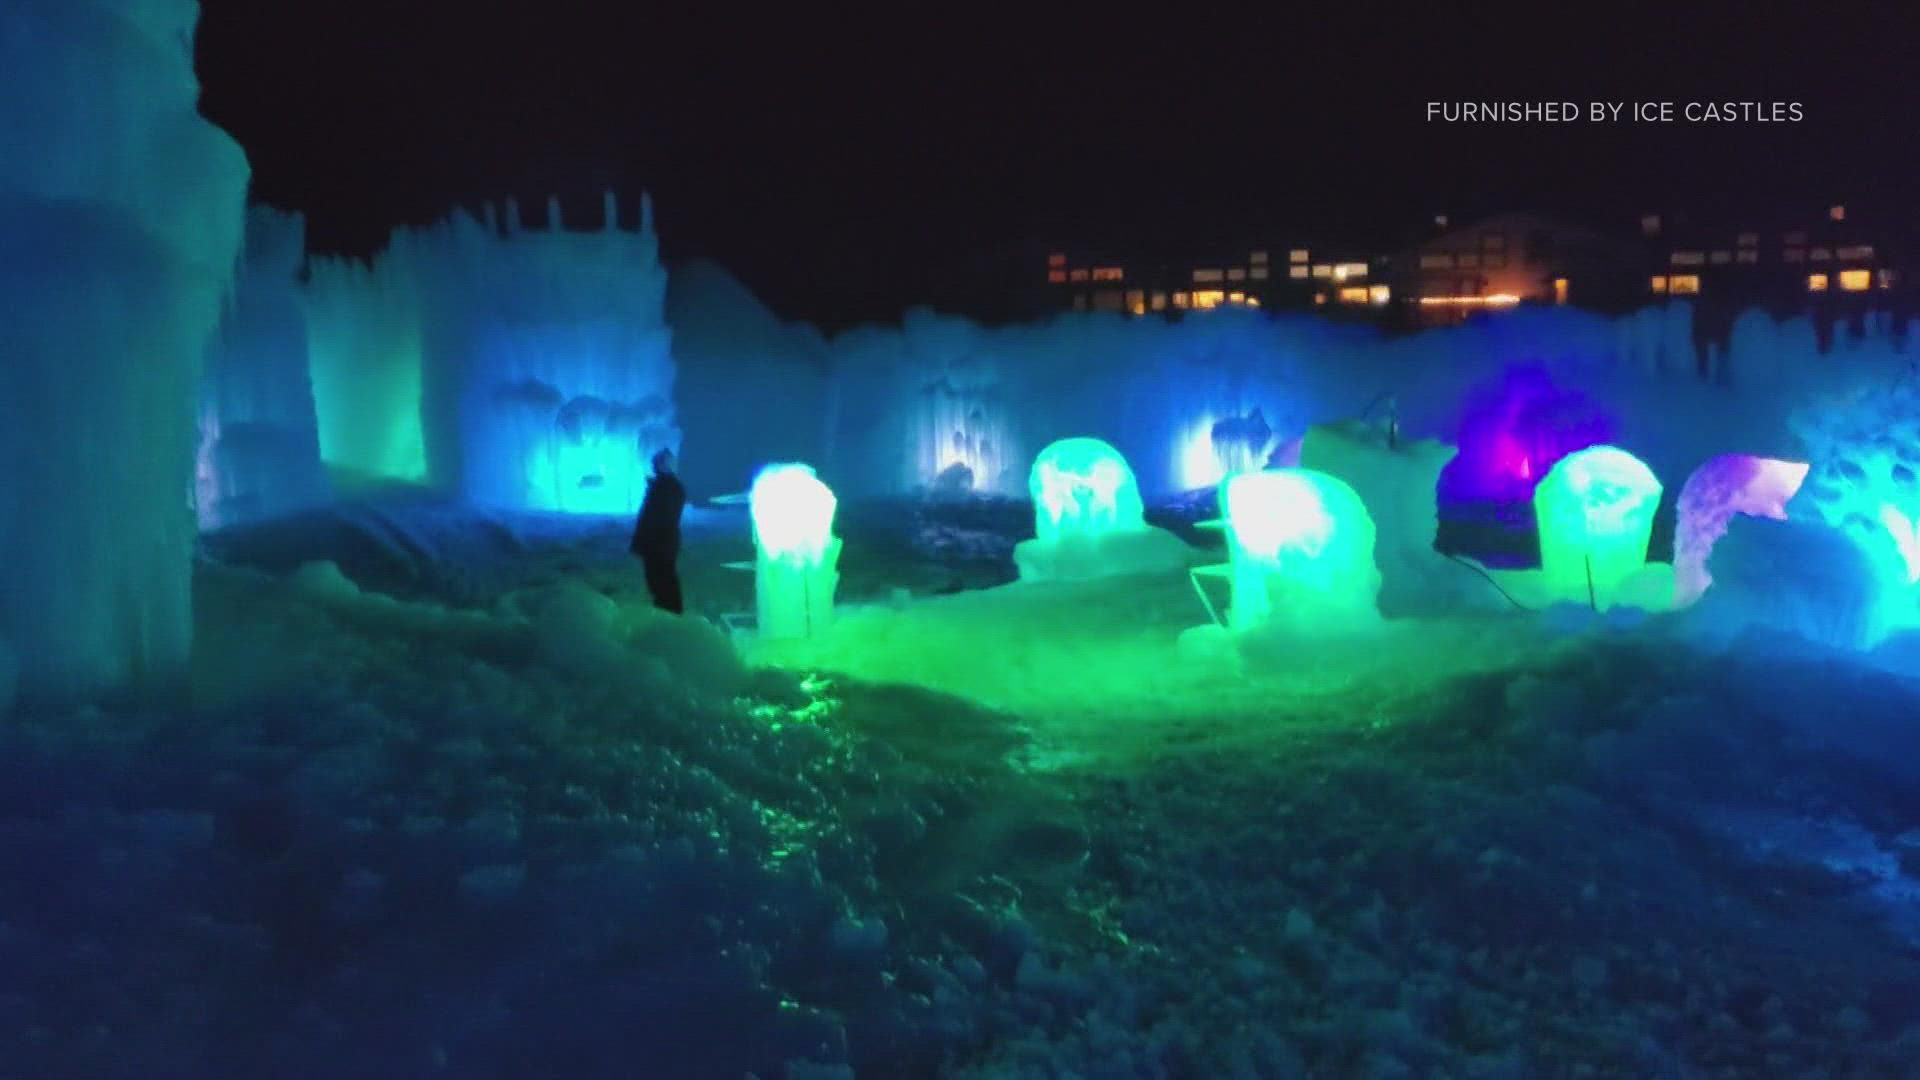 However, the Ice Castles will be in 5 other states this winter.